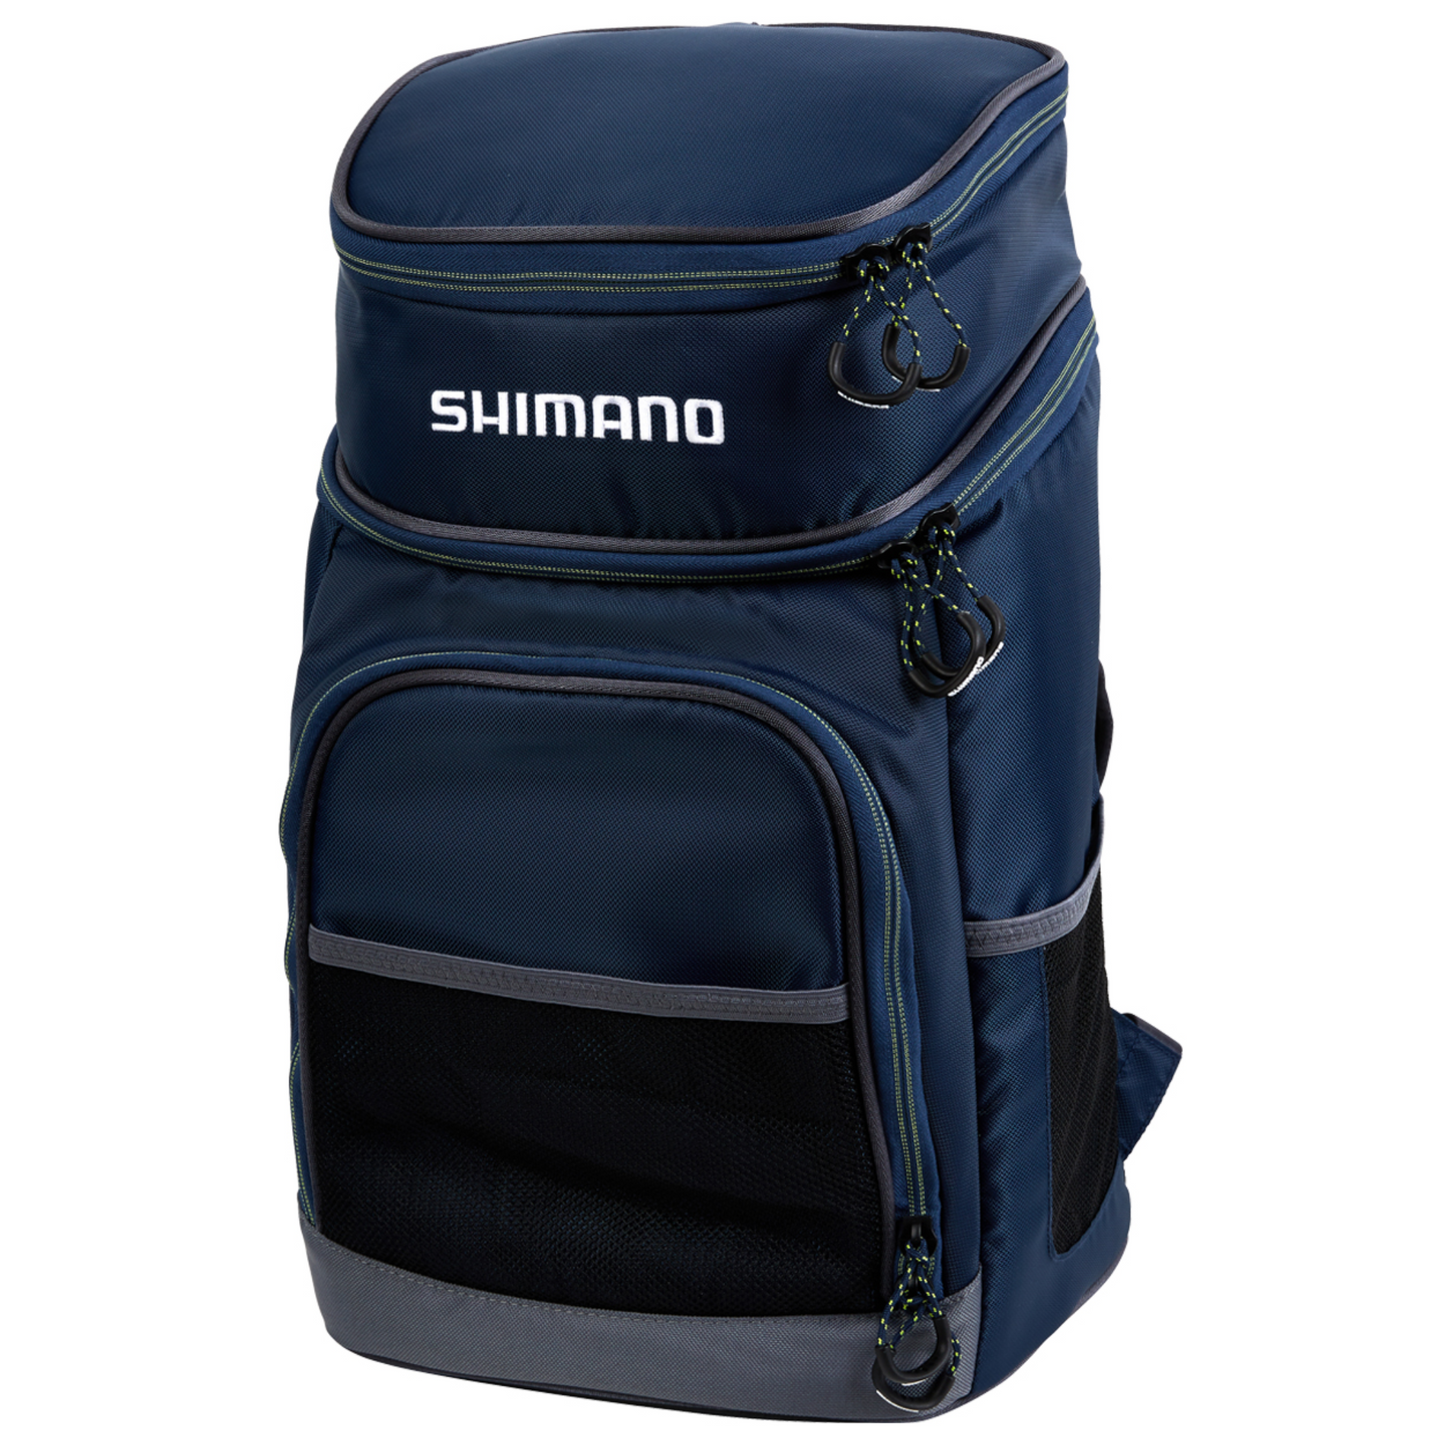 Shimano Cooler Daypack 27L (Lifestyle Gear)